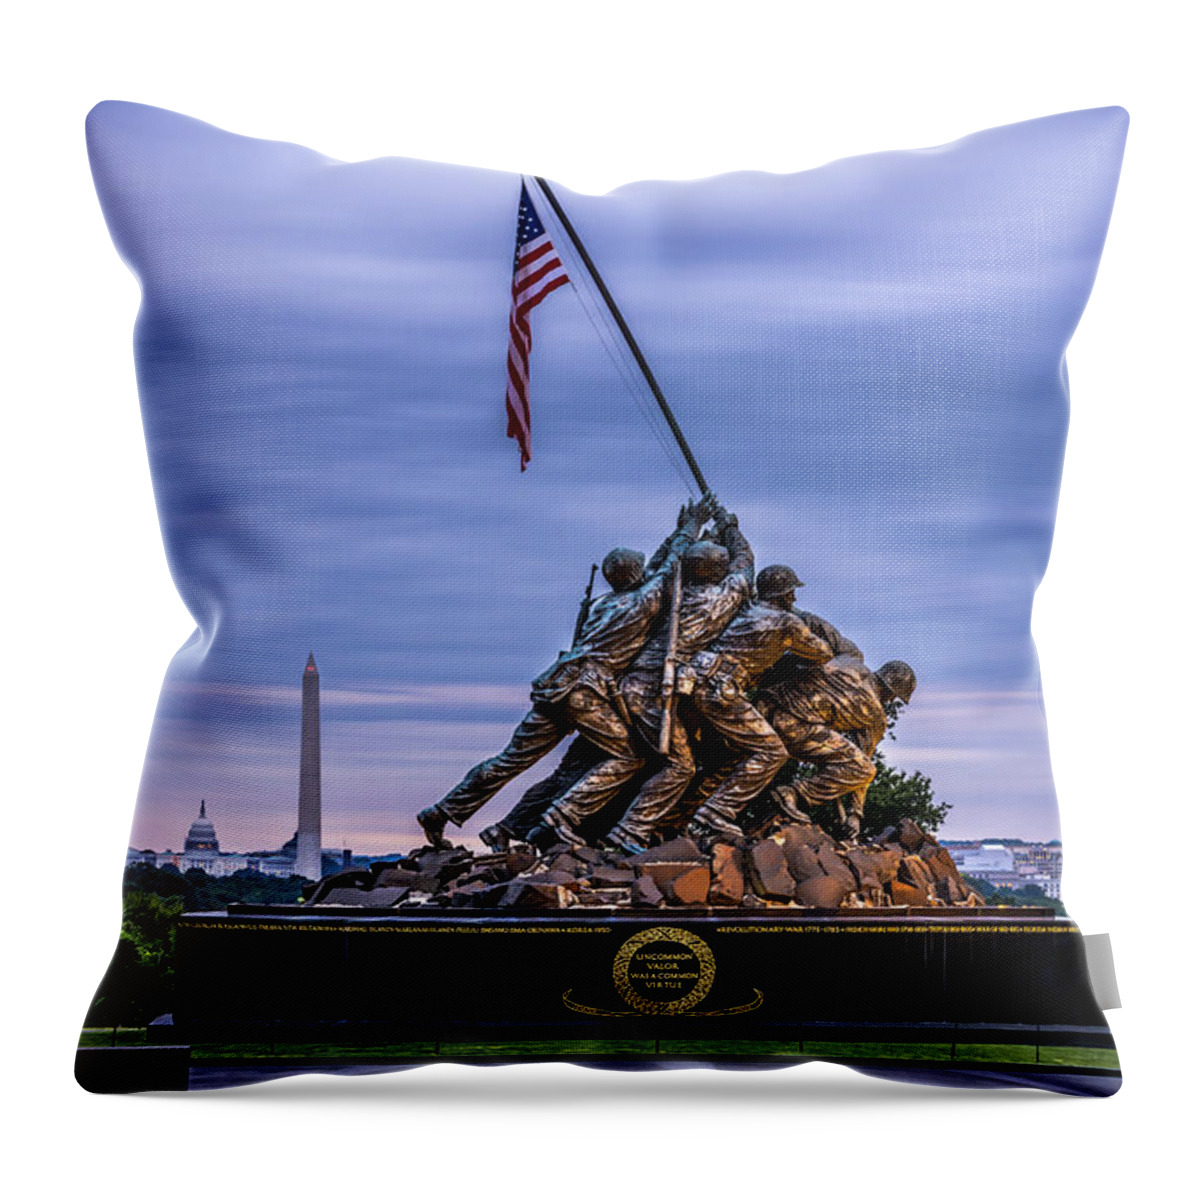 Iwo Jima Monument Throw Pillow featuring the photograph Iwo Jima Monument by David Morefield